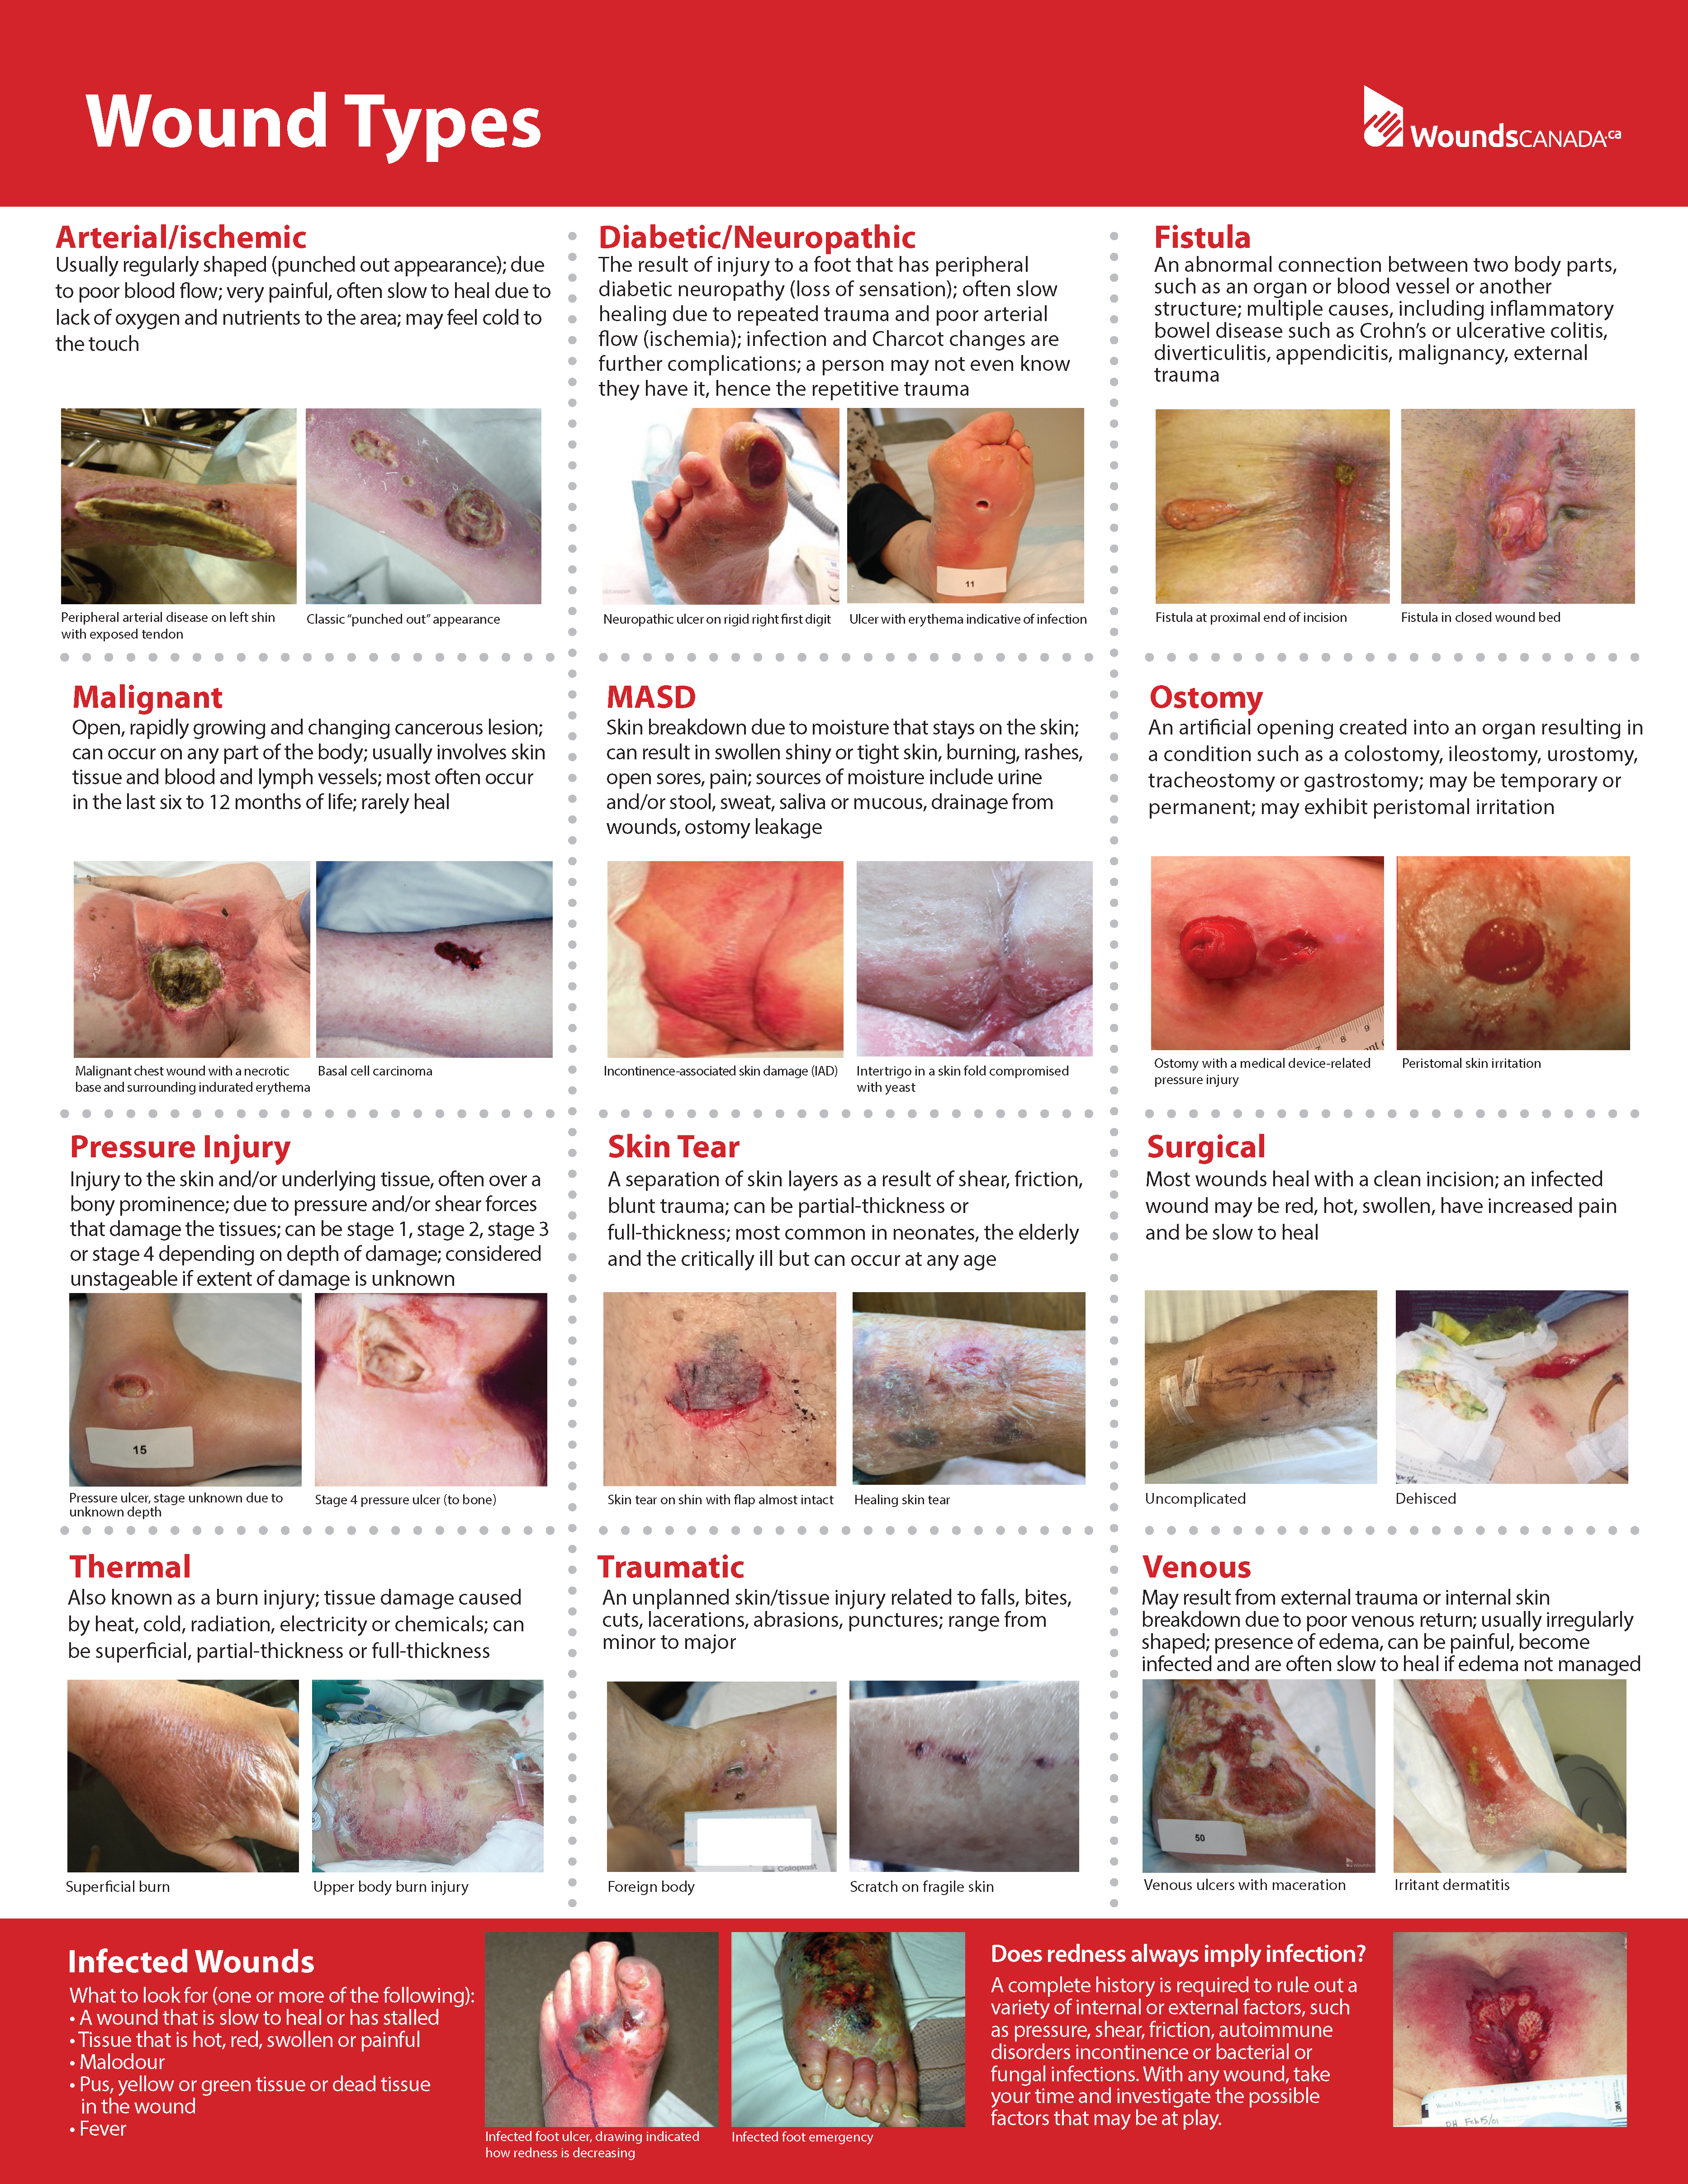 Wound Types Poster